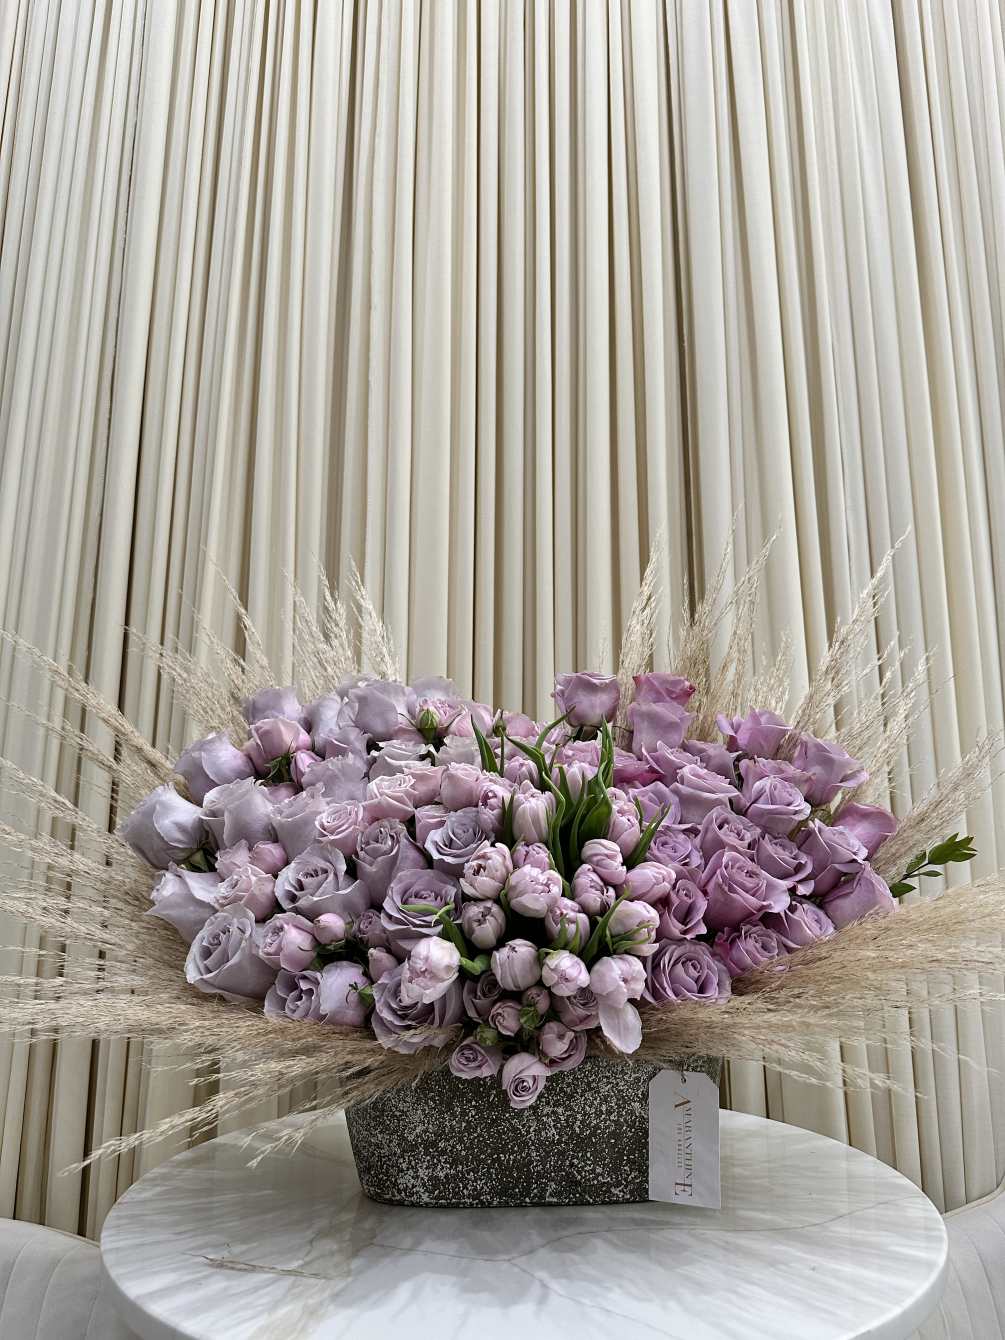 his mesmerizing bouquet features a beautiful ombre blend of purple roses and